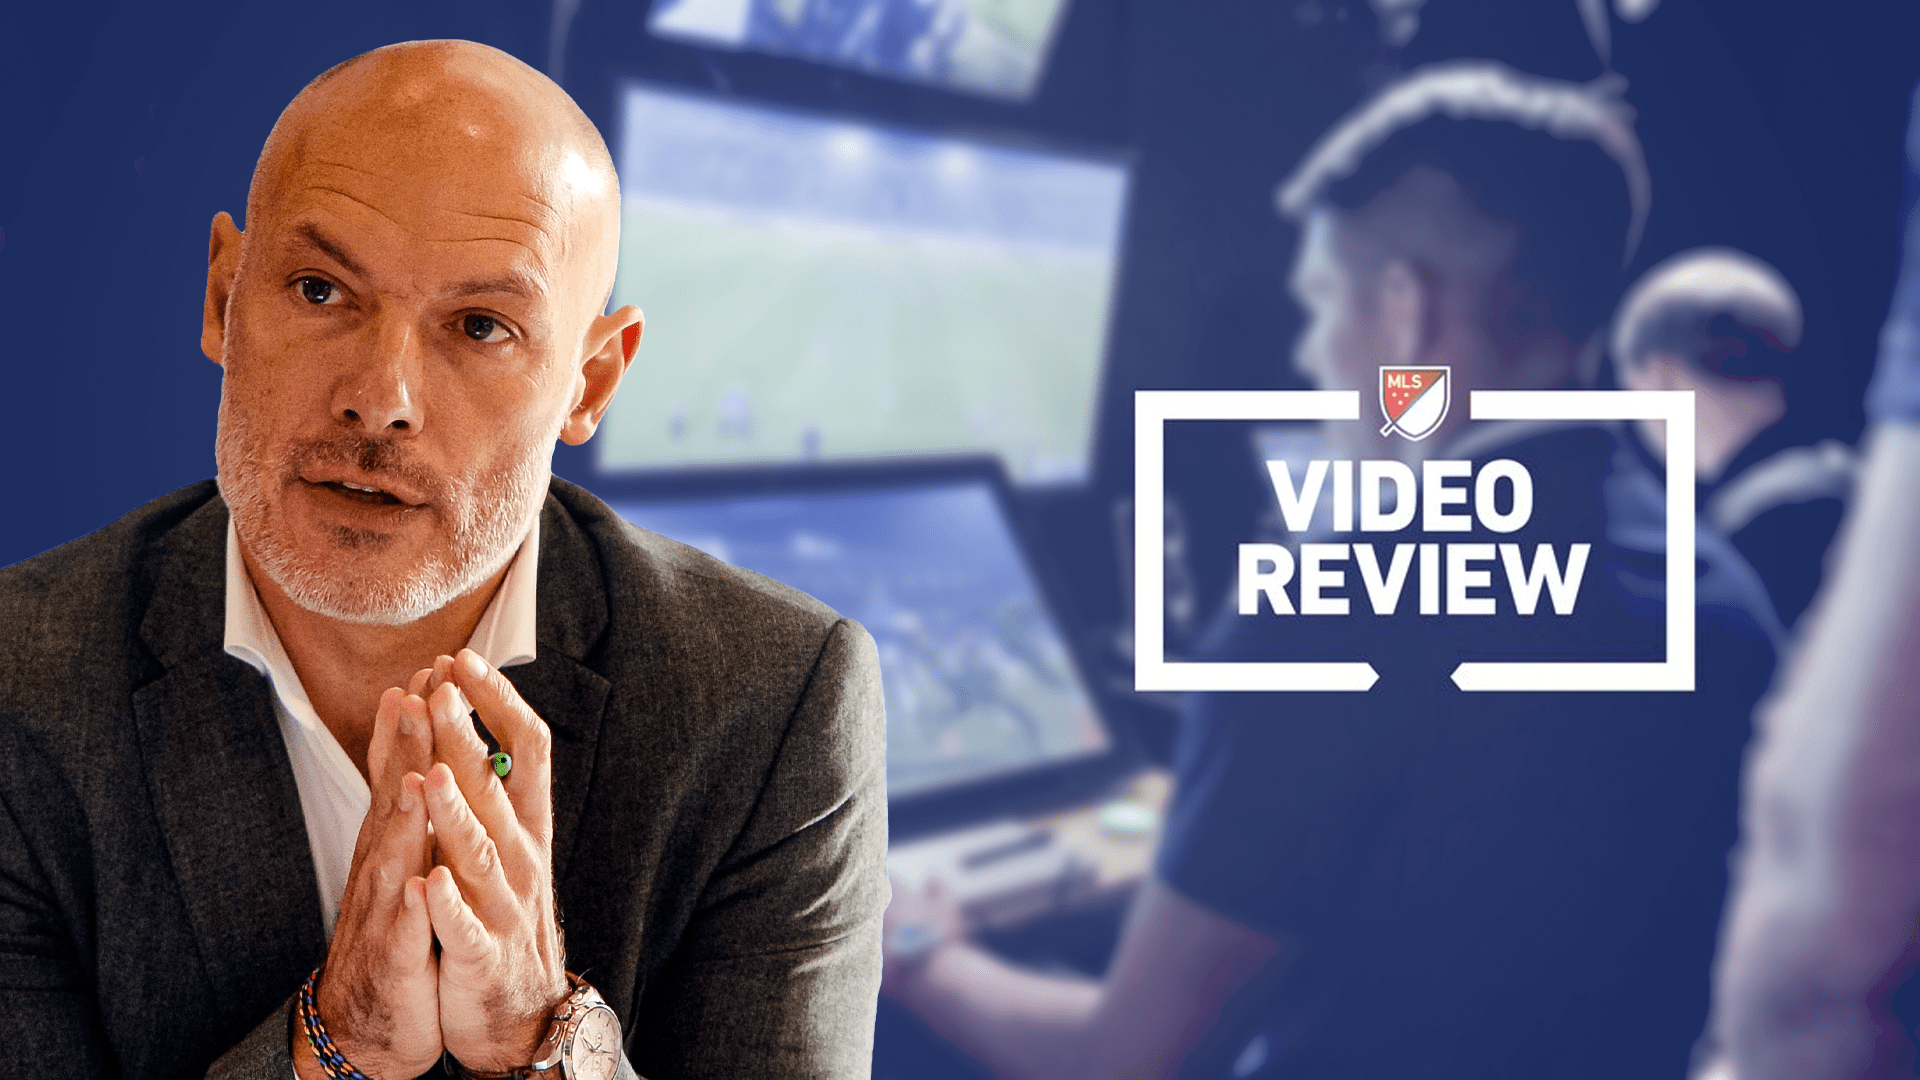 What to know about MLS's new Video Review Center in Atlanta 